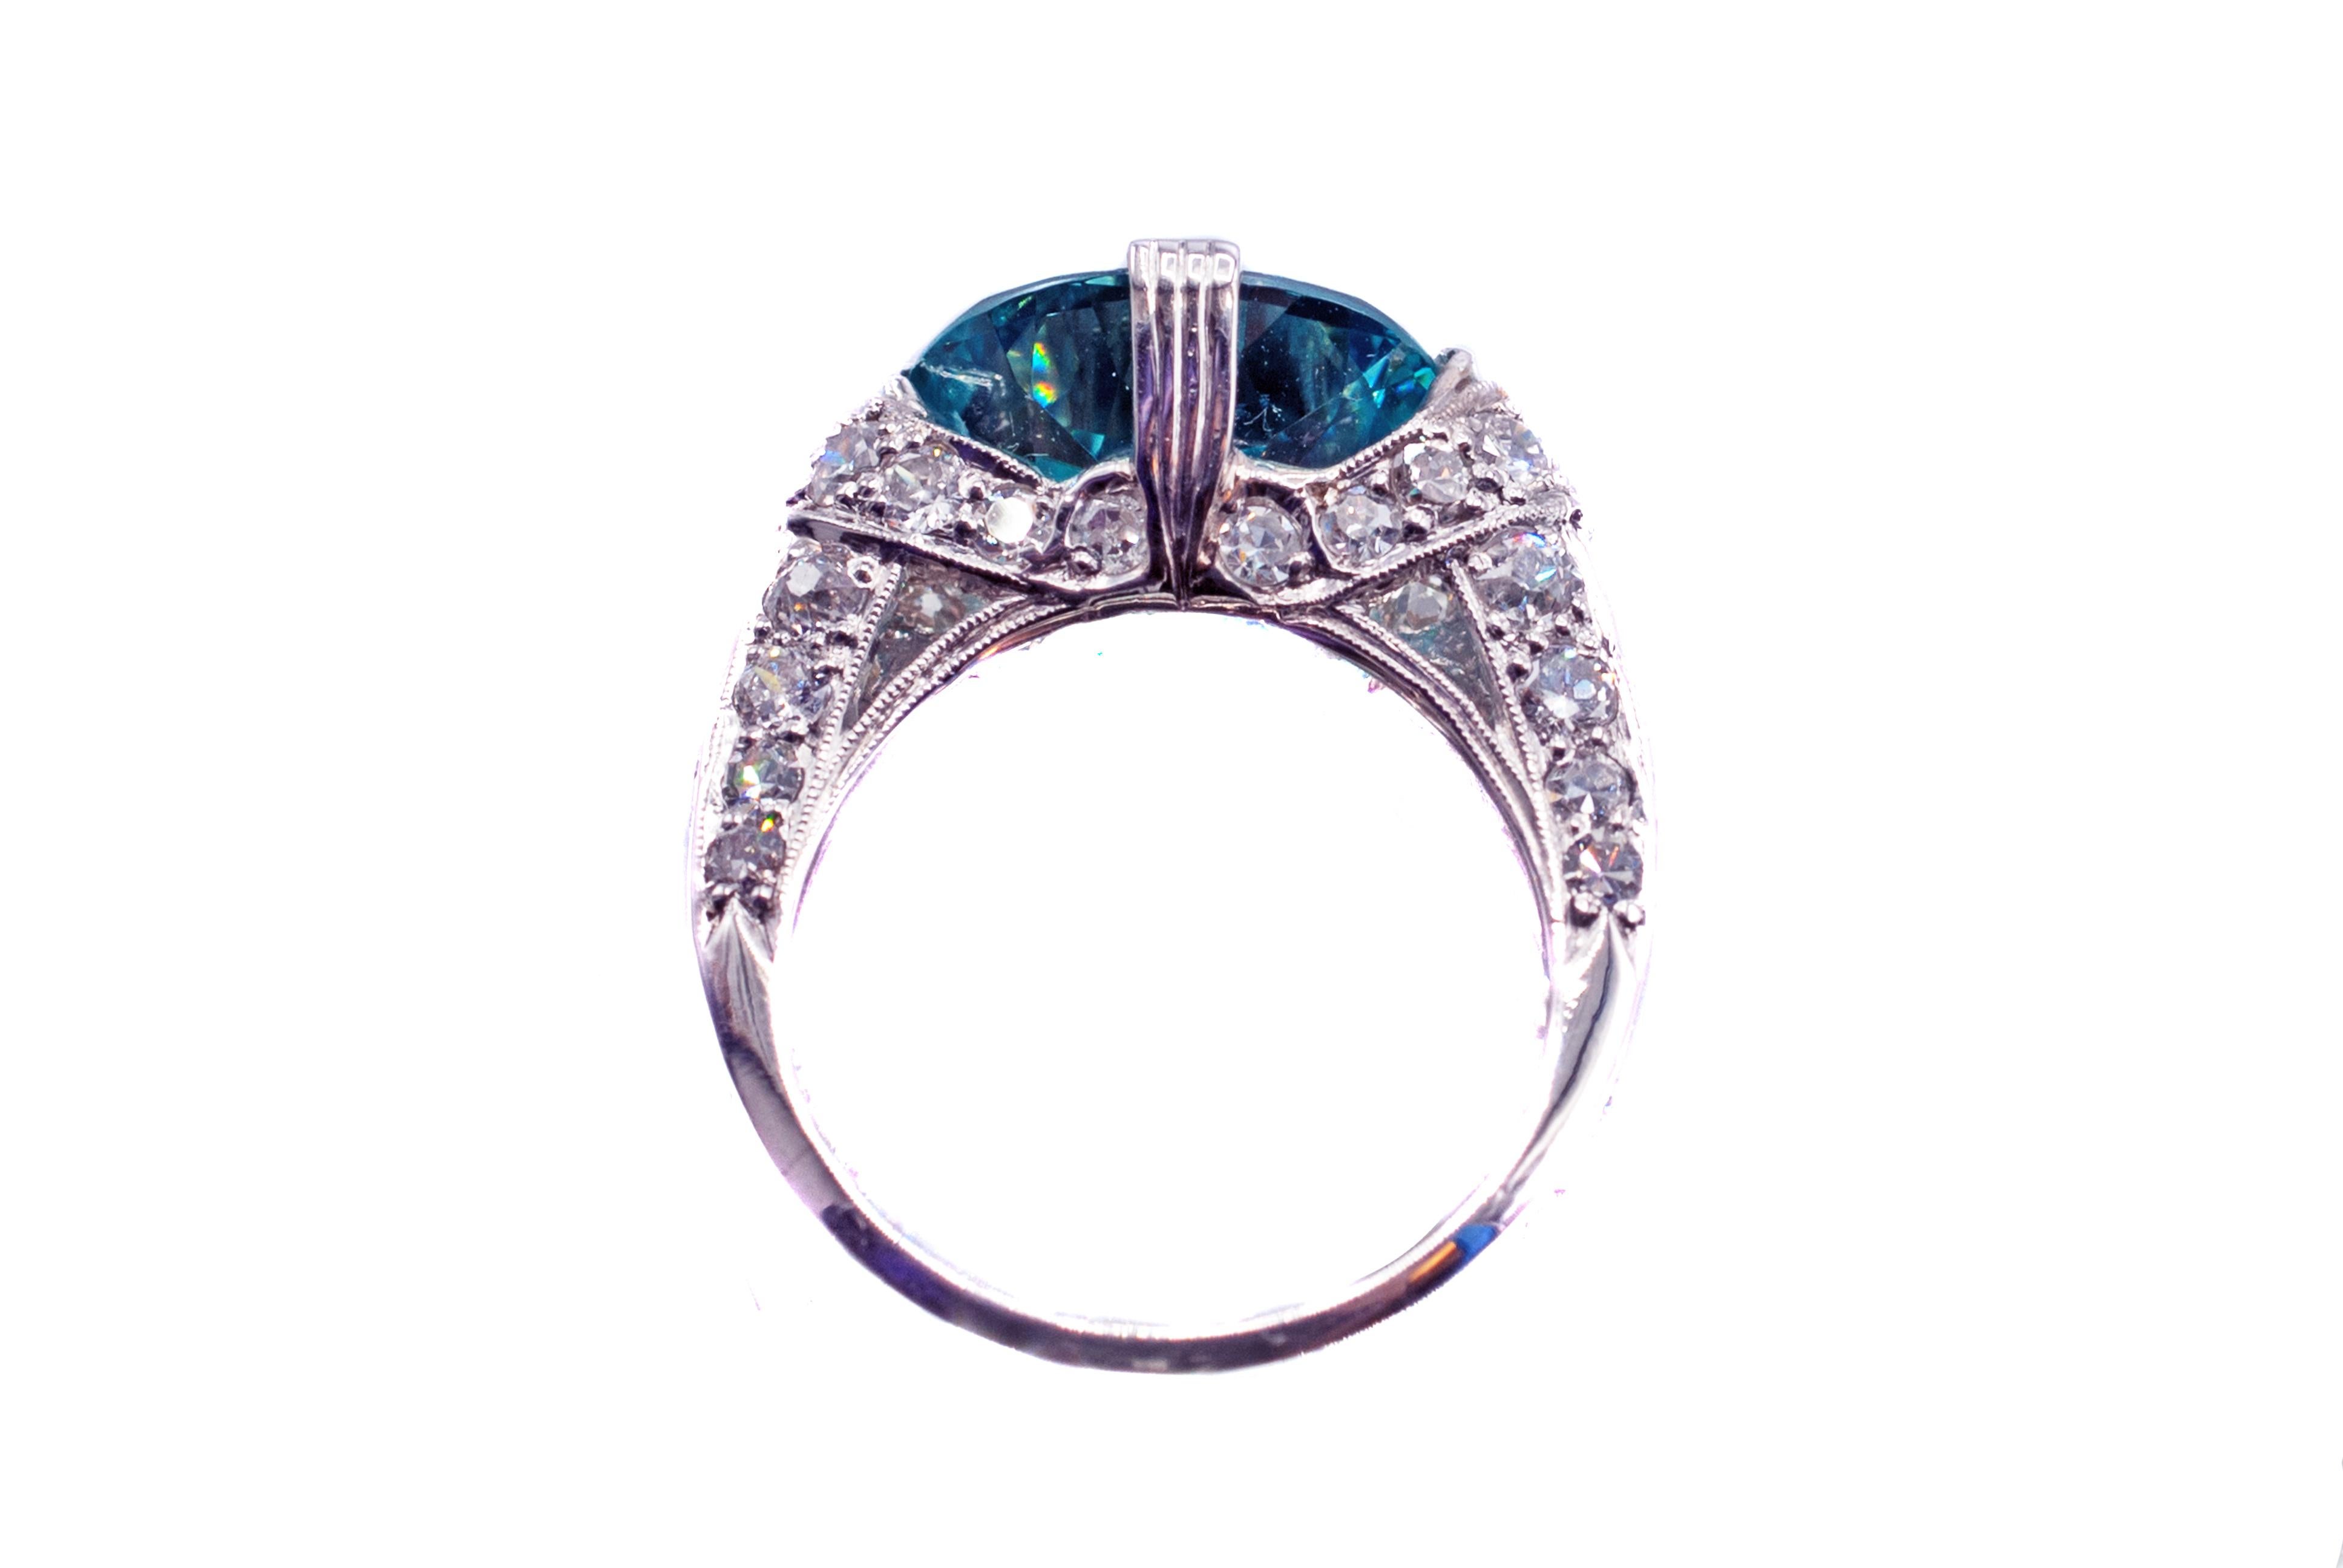 This enticing Art-Deco platinum diamond blue zircon ring from ca. 1930 features amazing craftsmanship and design. The centrally set 8.94 carat zircon is incredibly clear and displays an electric deep aqua blue color distinct to these unique